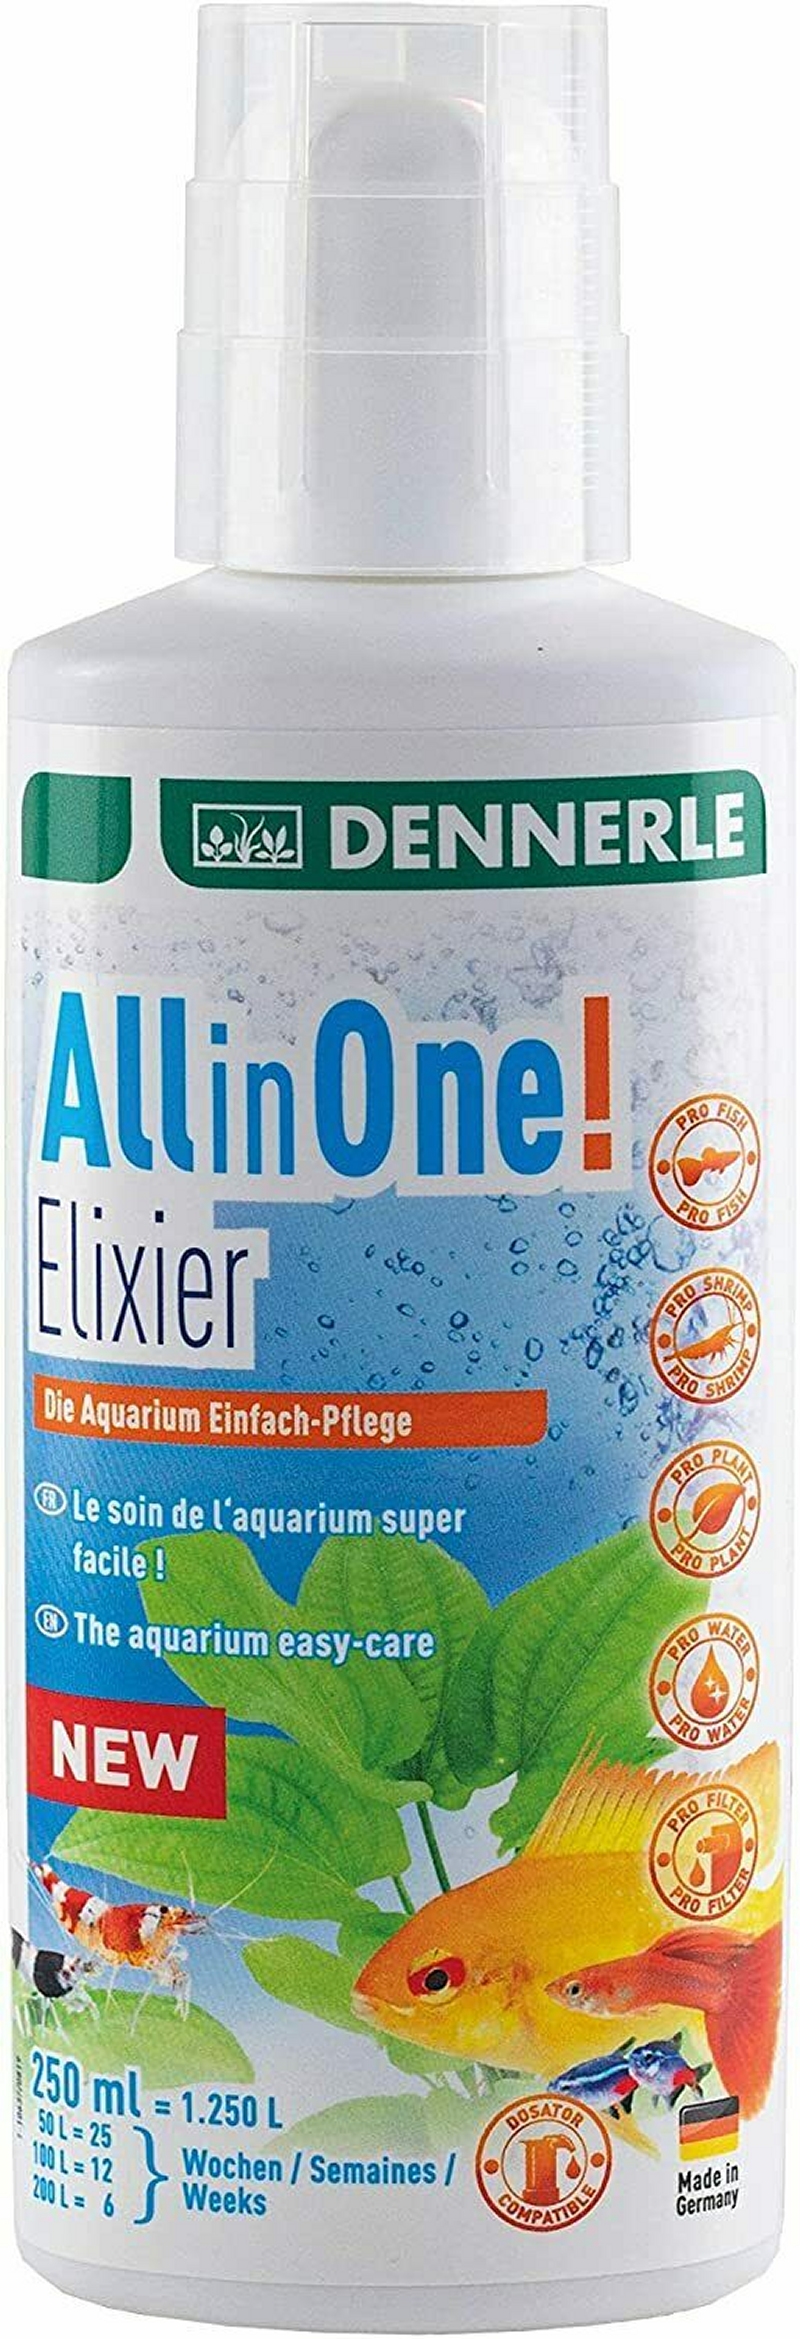 Dennerle All in One! Elixier 500ml